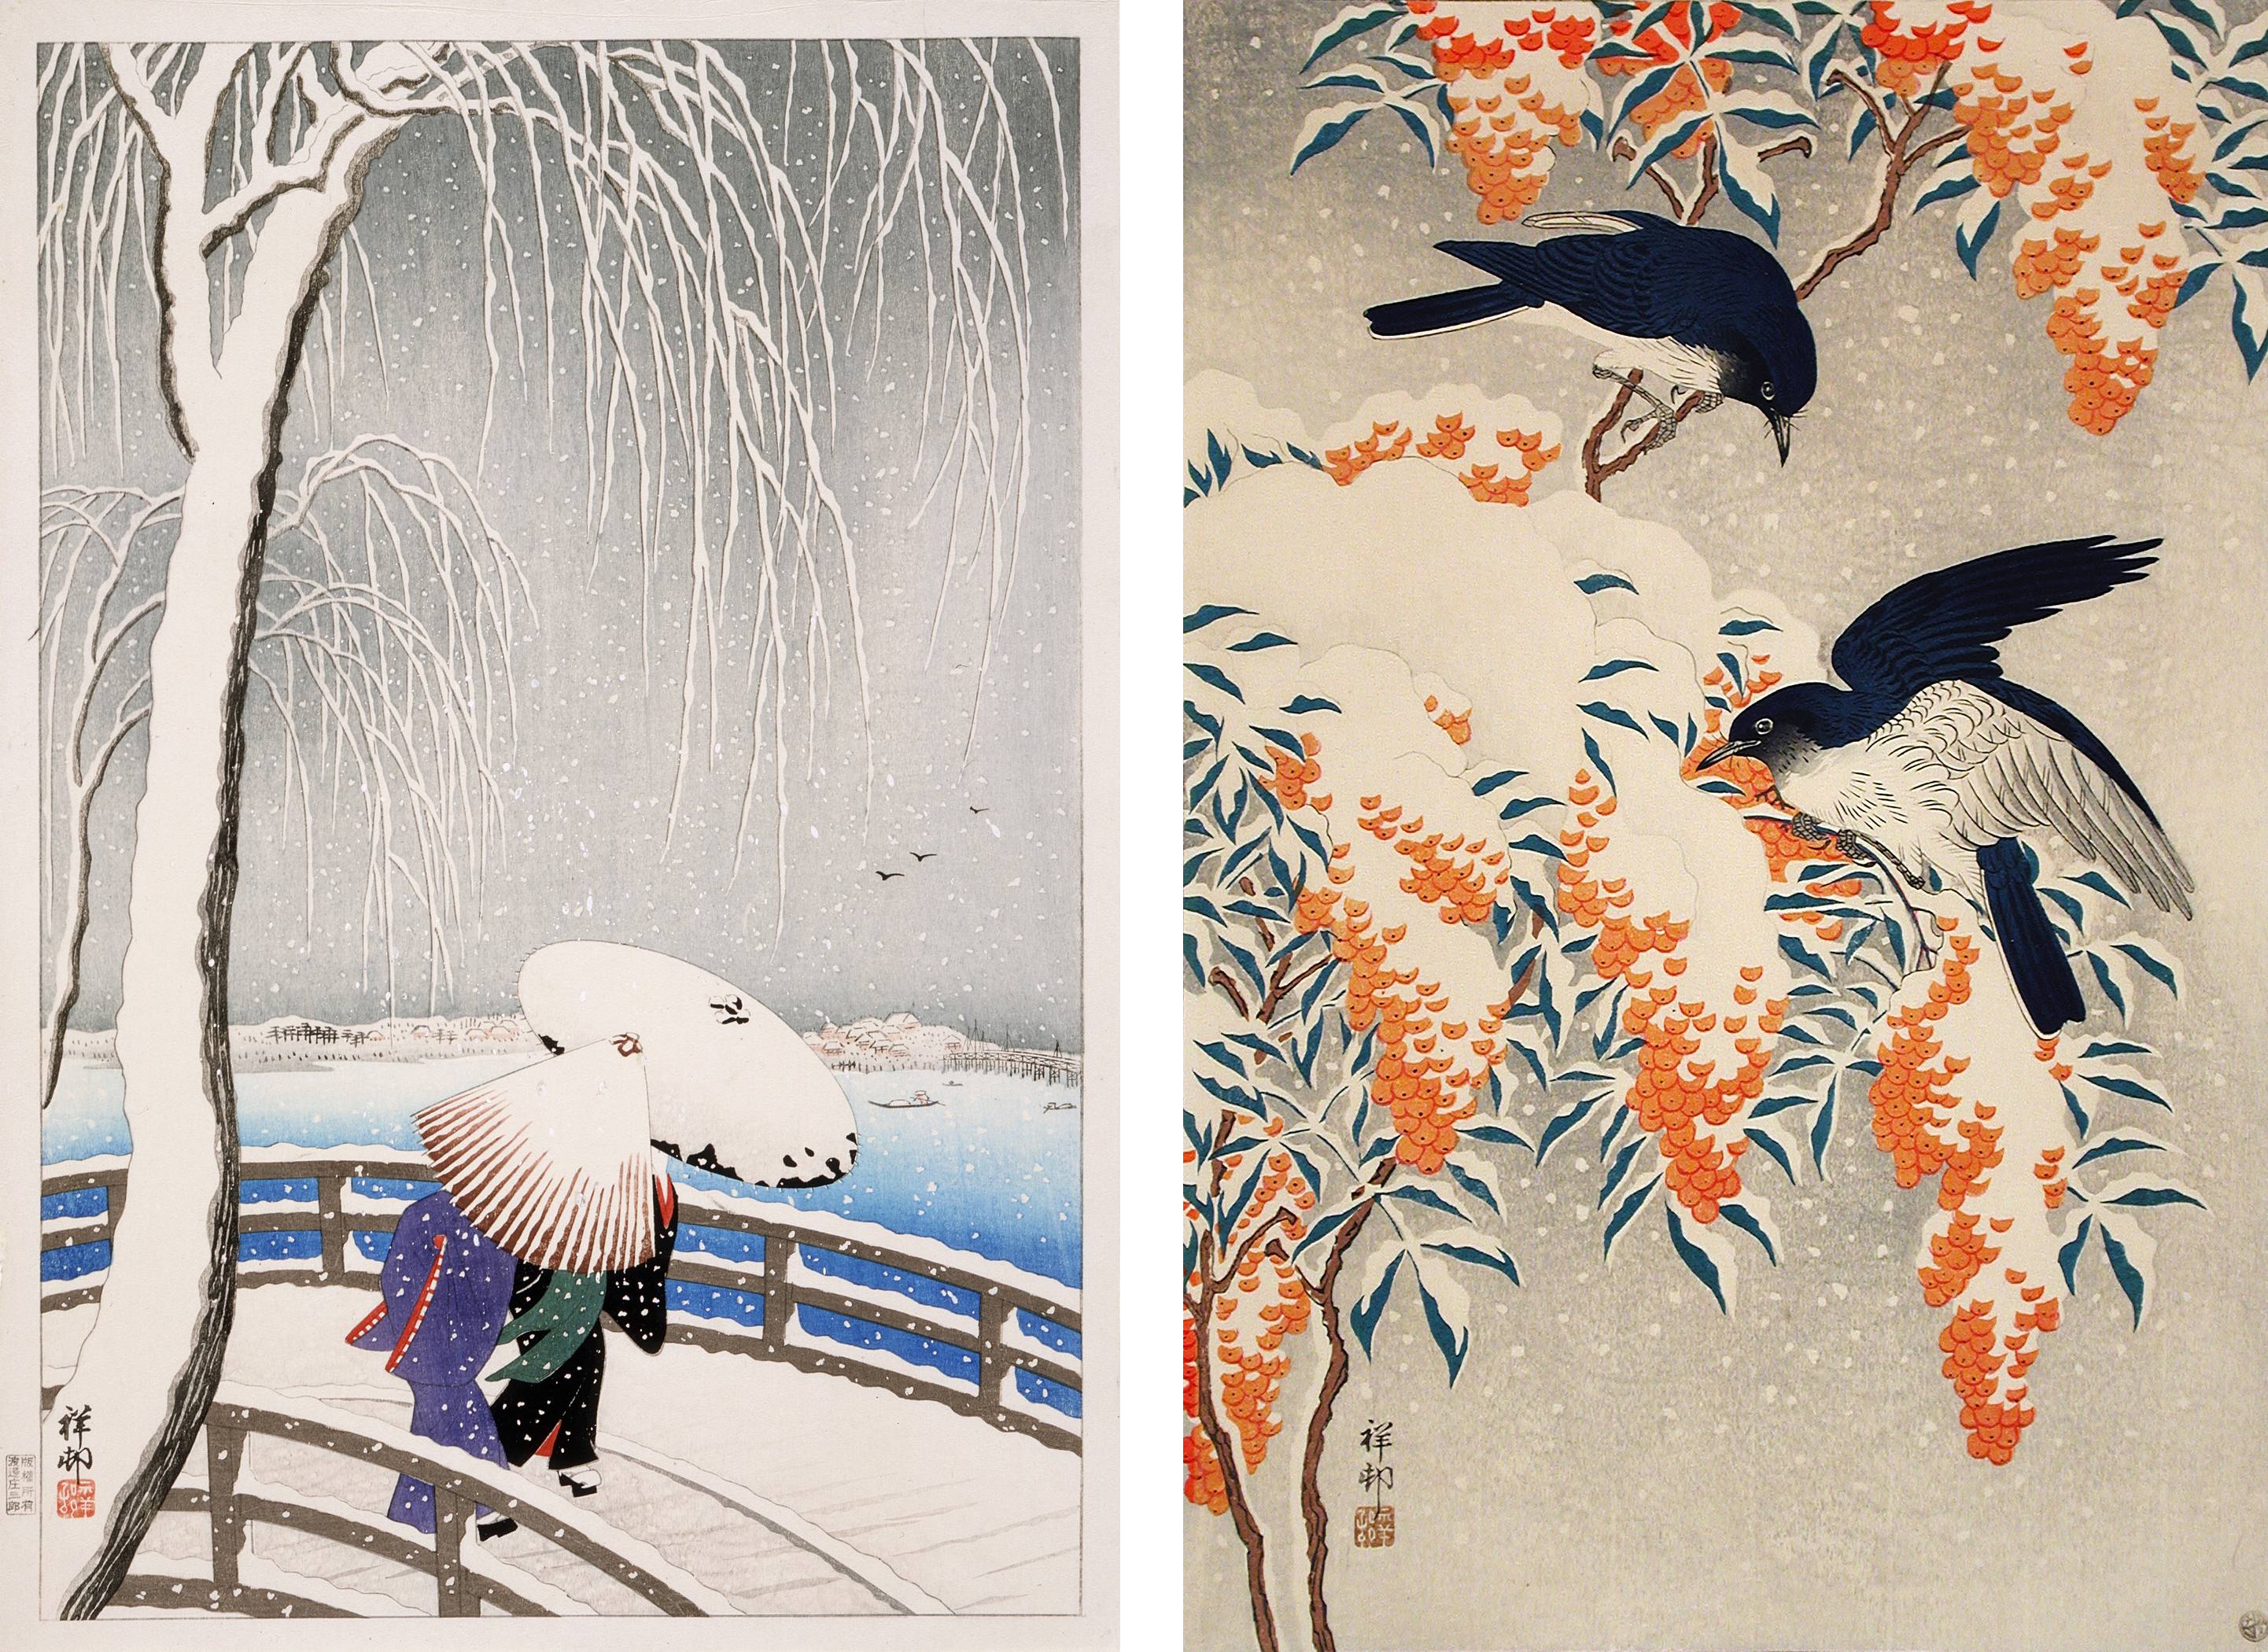 Left: Ohara Shōson, Snow on Willow Bridge, 1927, Los Angeles County Museum of Art, gift of Carl Holmes, photo © Museum Associates/LACMA; Right: Ohara Shōson, Nandina and Flycatchers in Snow, 1929, Los Angeles County Museum of Art, gift of Chuck Bowdlear, PhD, and John Borozan, MA, photo © Museum Associates/LACMA